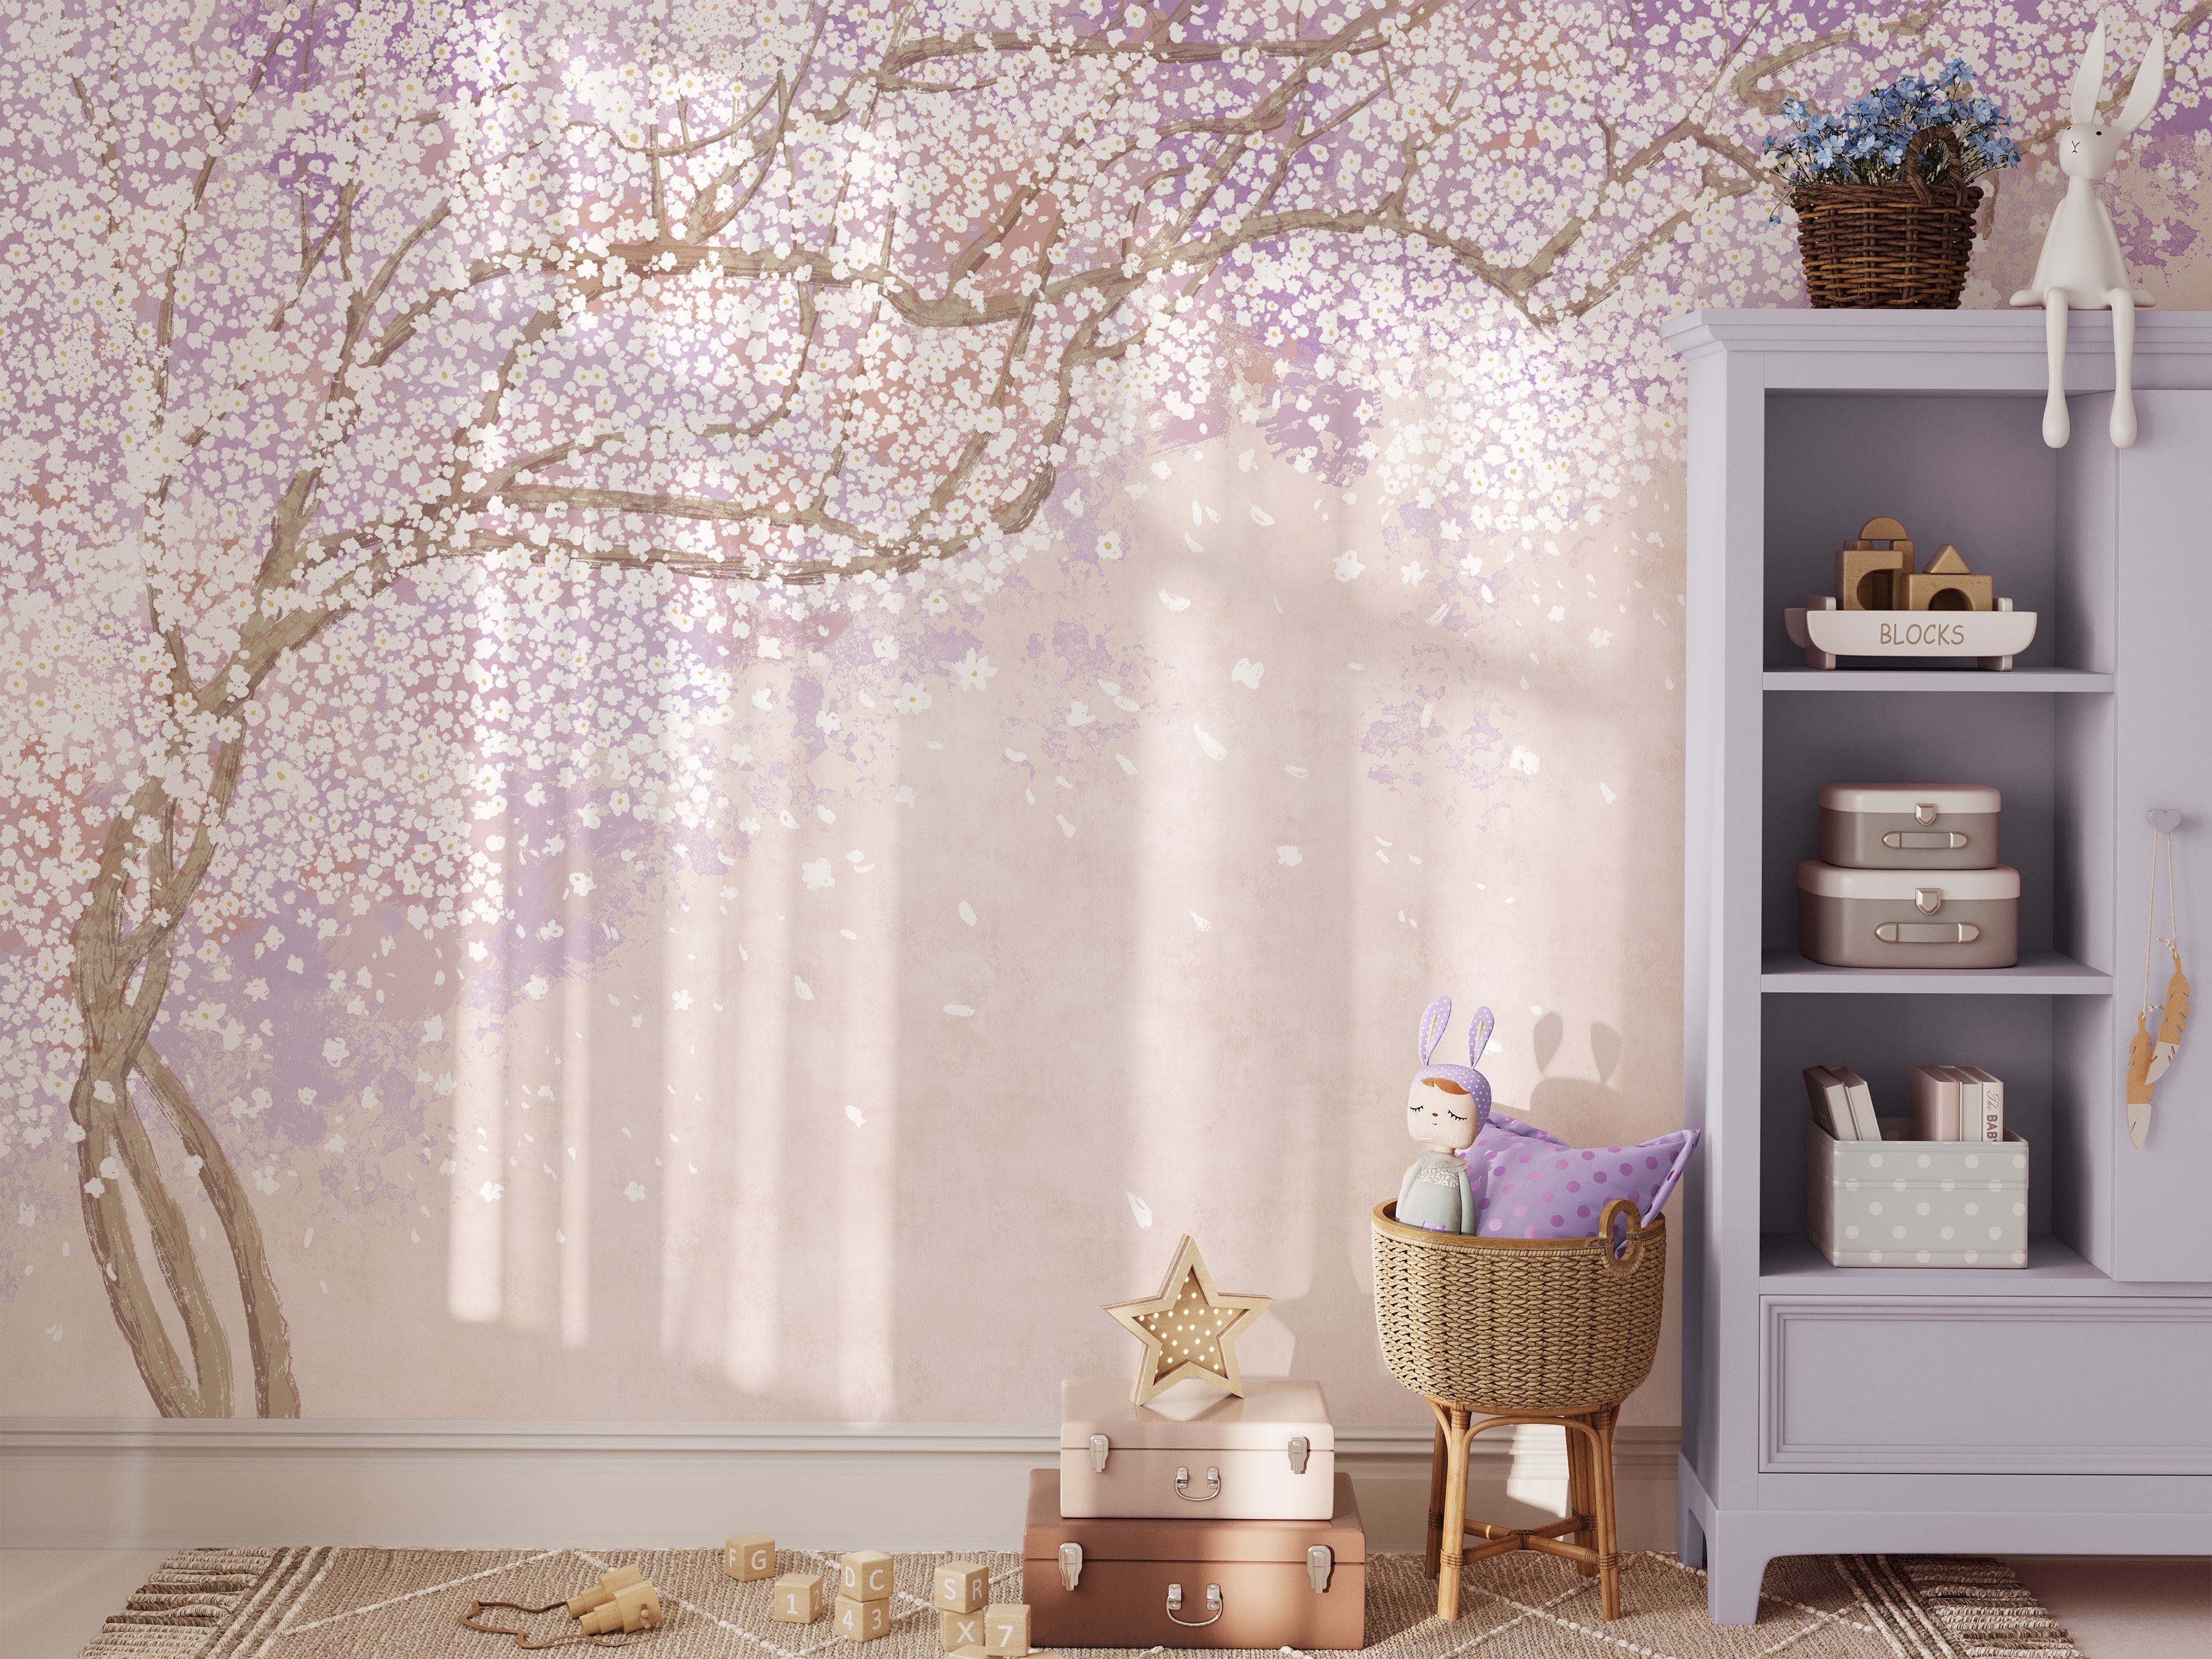 Sakura Nursery Kid Wallpaper Mural featuring a delicate cherry blossom tree with branches stretching across a pastel pink background, creating a serene and whimsical atmosphere in a child's room, complete with a cozy wicker basket, plush bunny toy, and a lavender bookshelf.